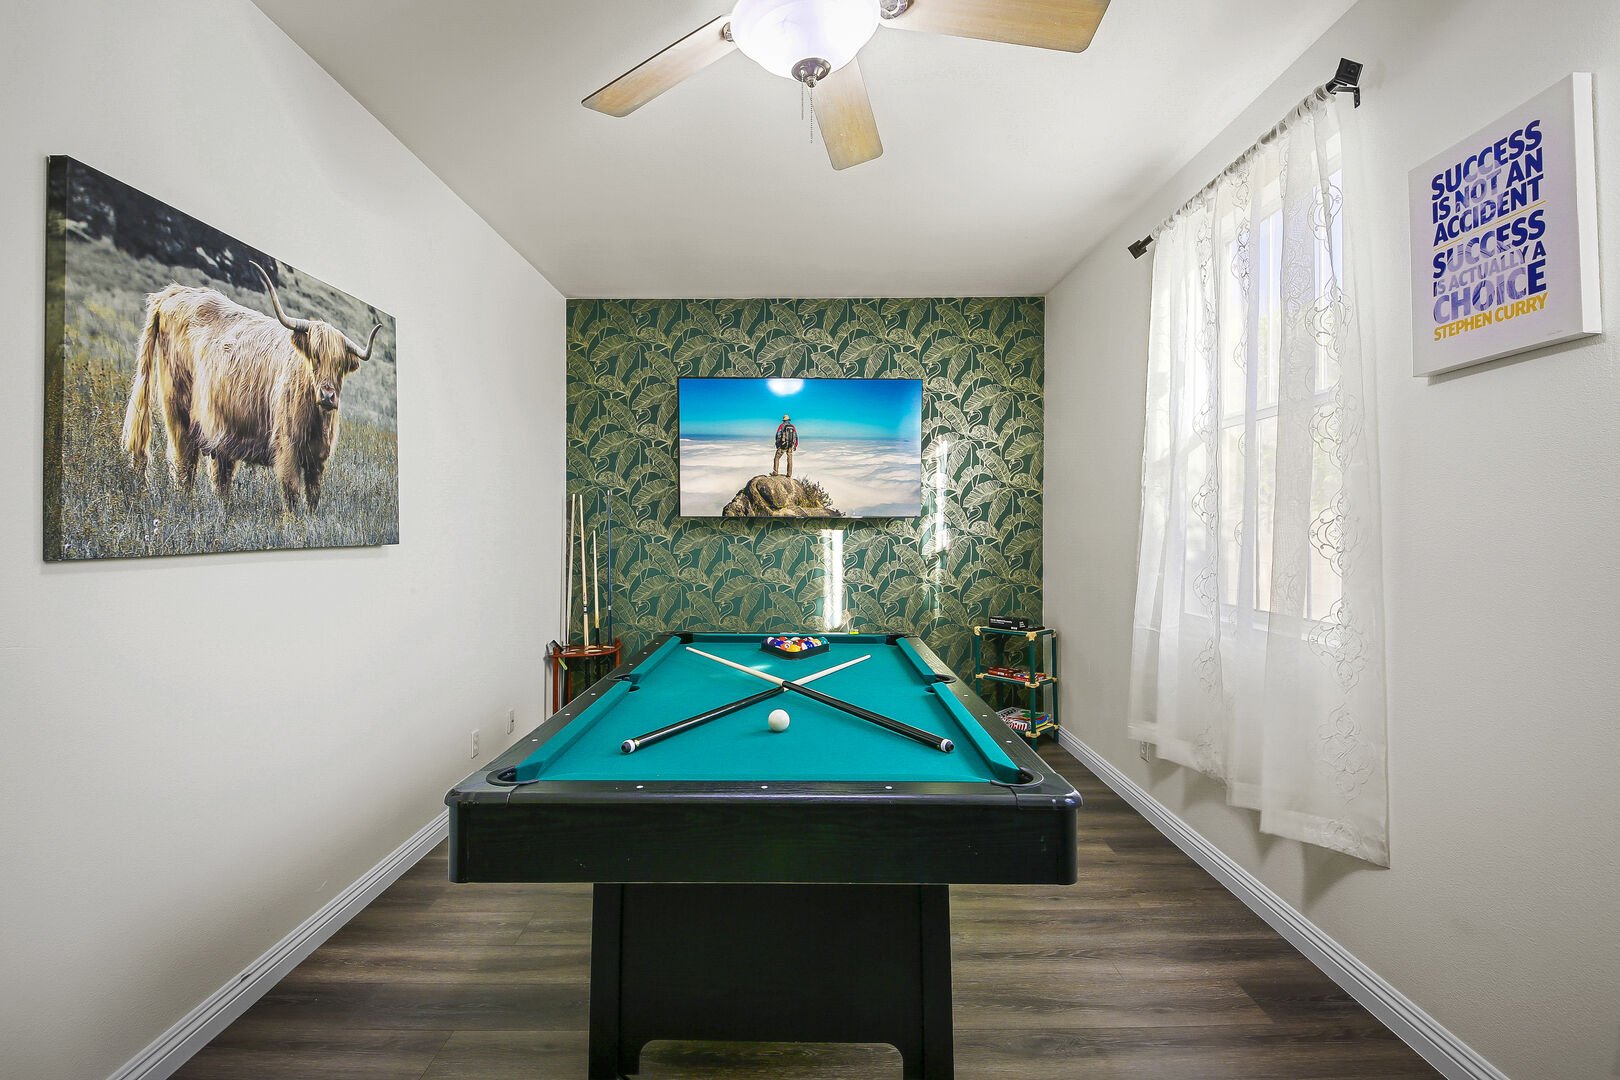 Challenge your friends and family to a tournament in 9-ball in the attached game room from bedroom 4.